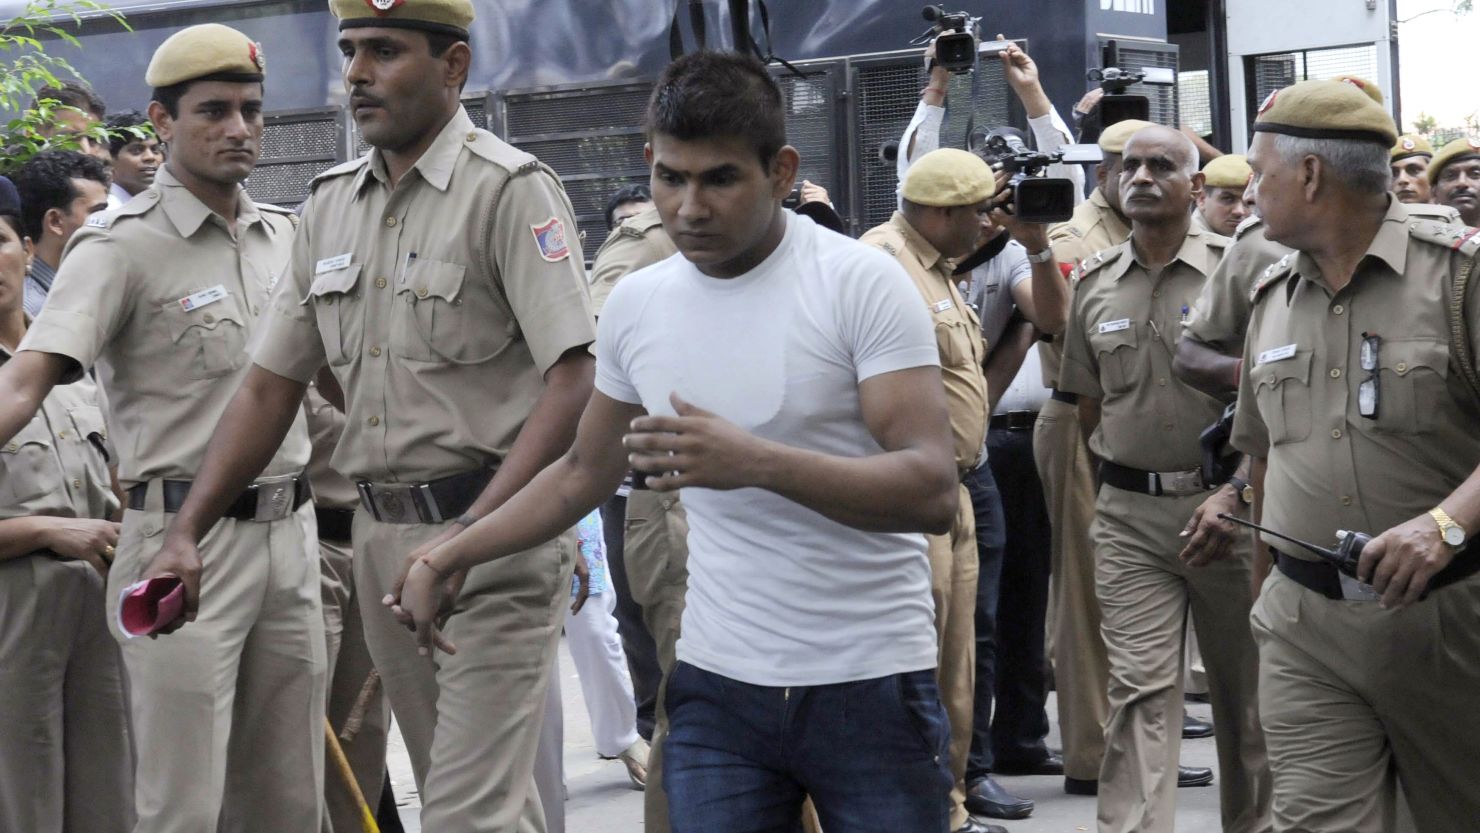 Vinay Sharma, one of the accused, is led into court in September 2013.